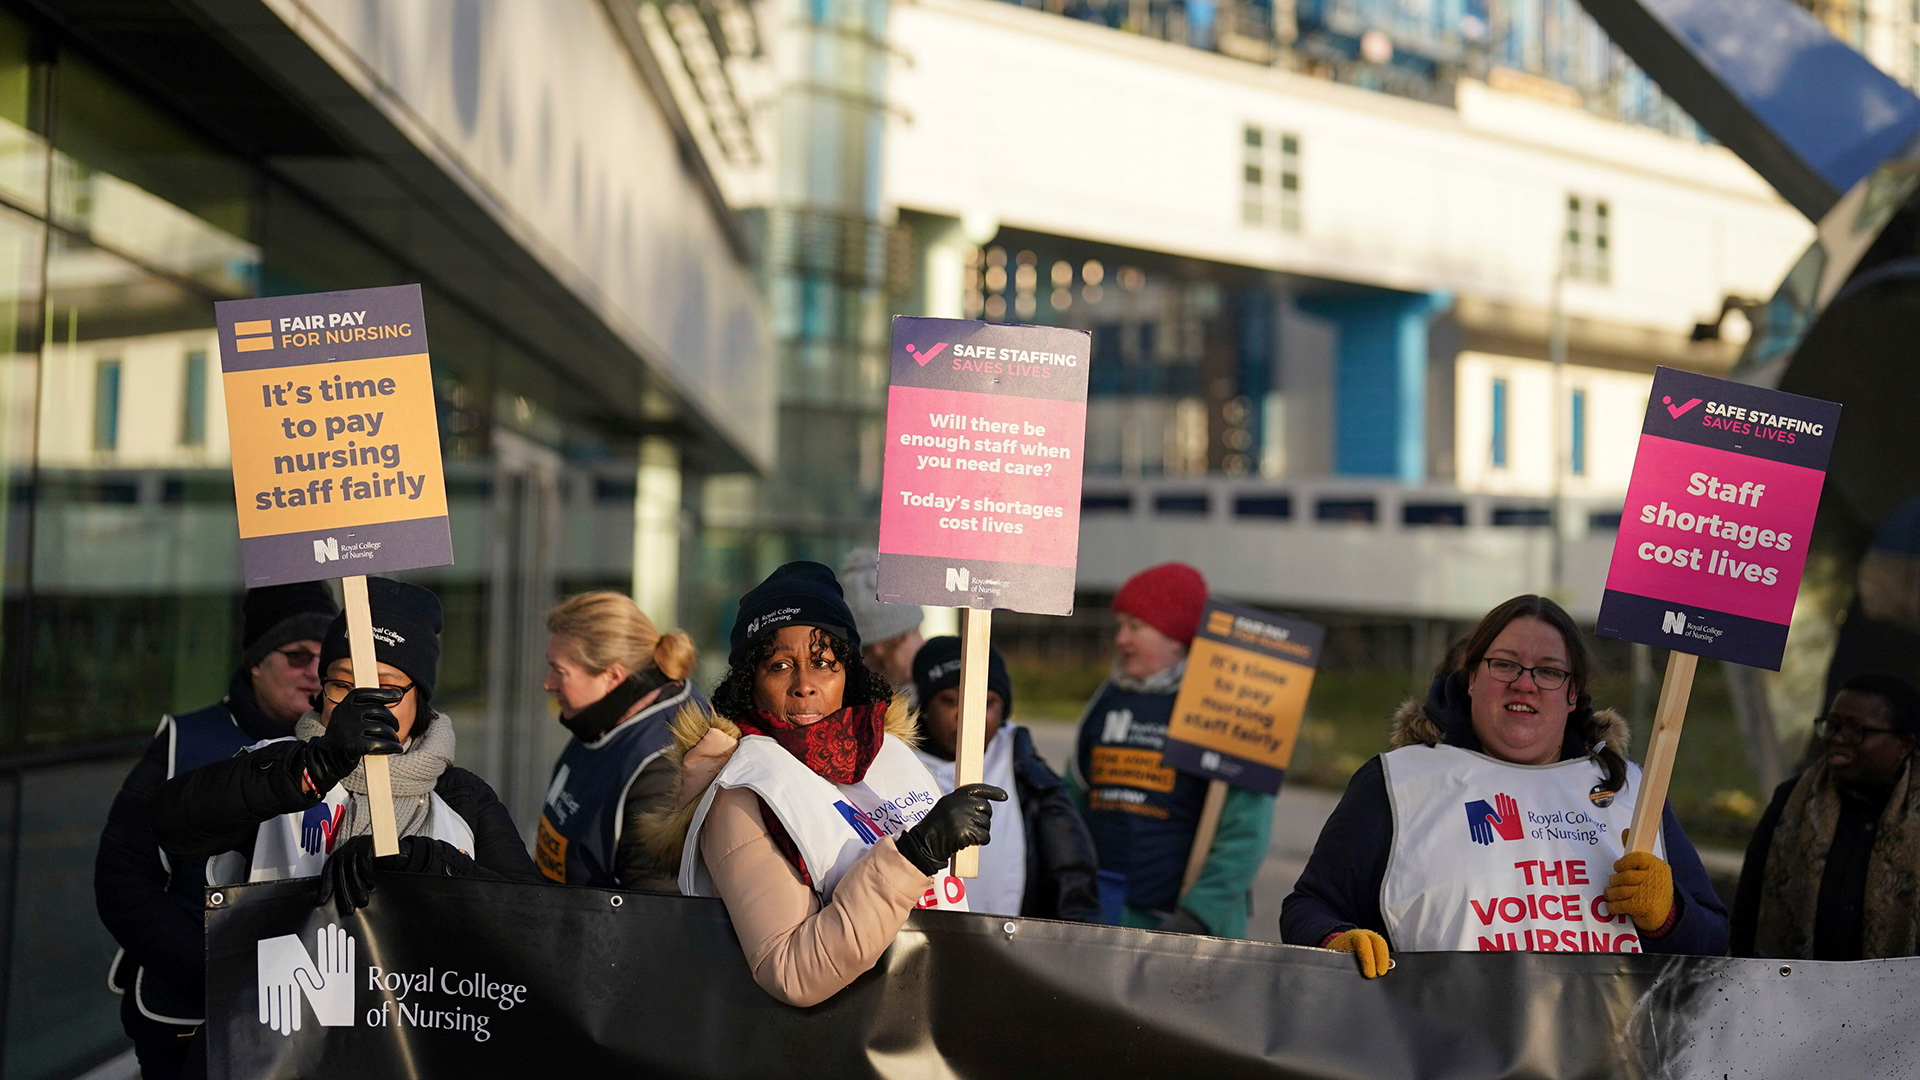 Industrial action in the health services: historic strike action in the British NHS